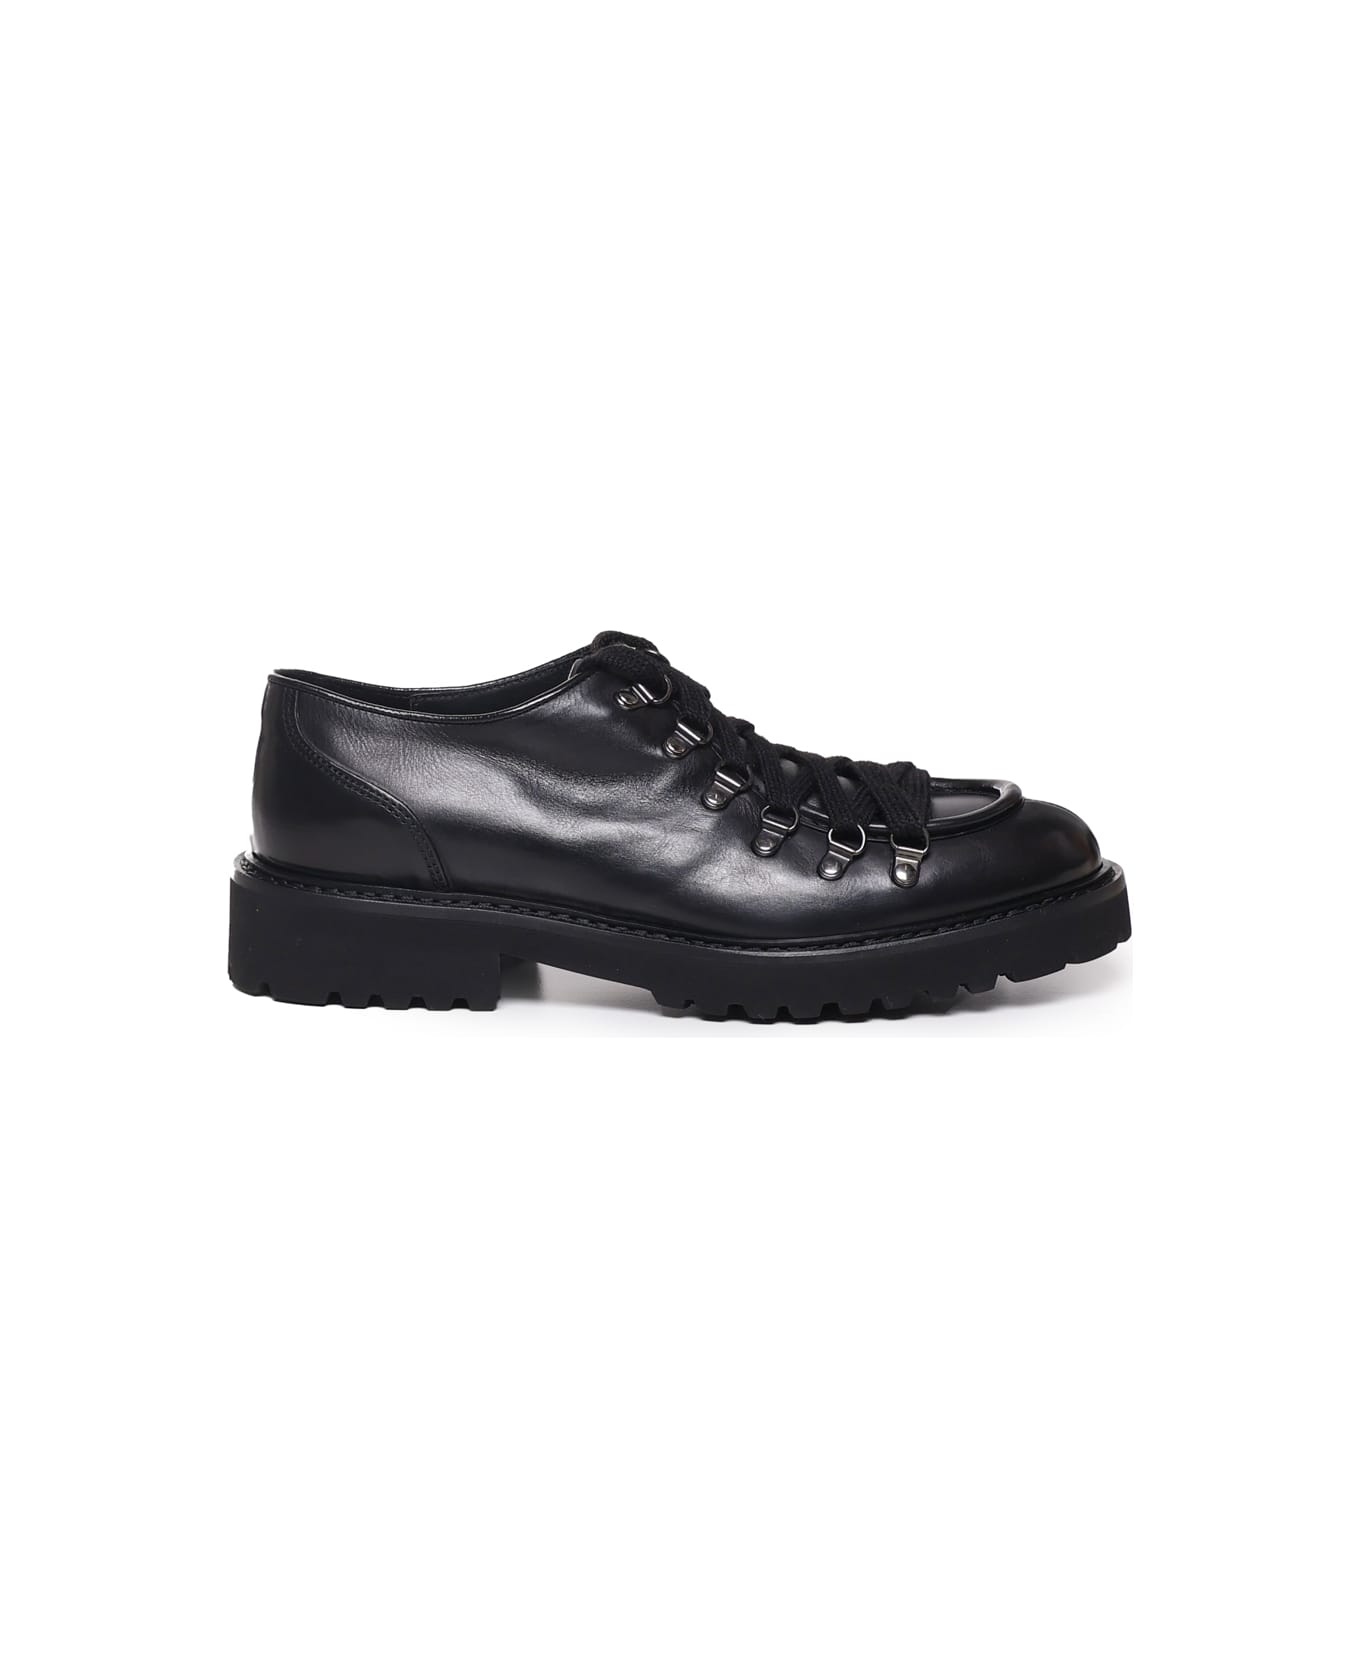 Doucal's Calfskin Lace-up Shoes - Black ローファー＆デッキシューズ